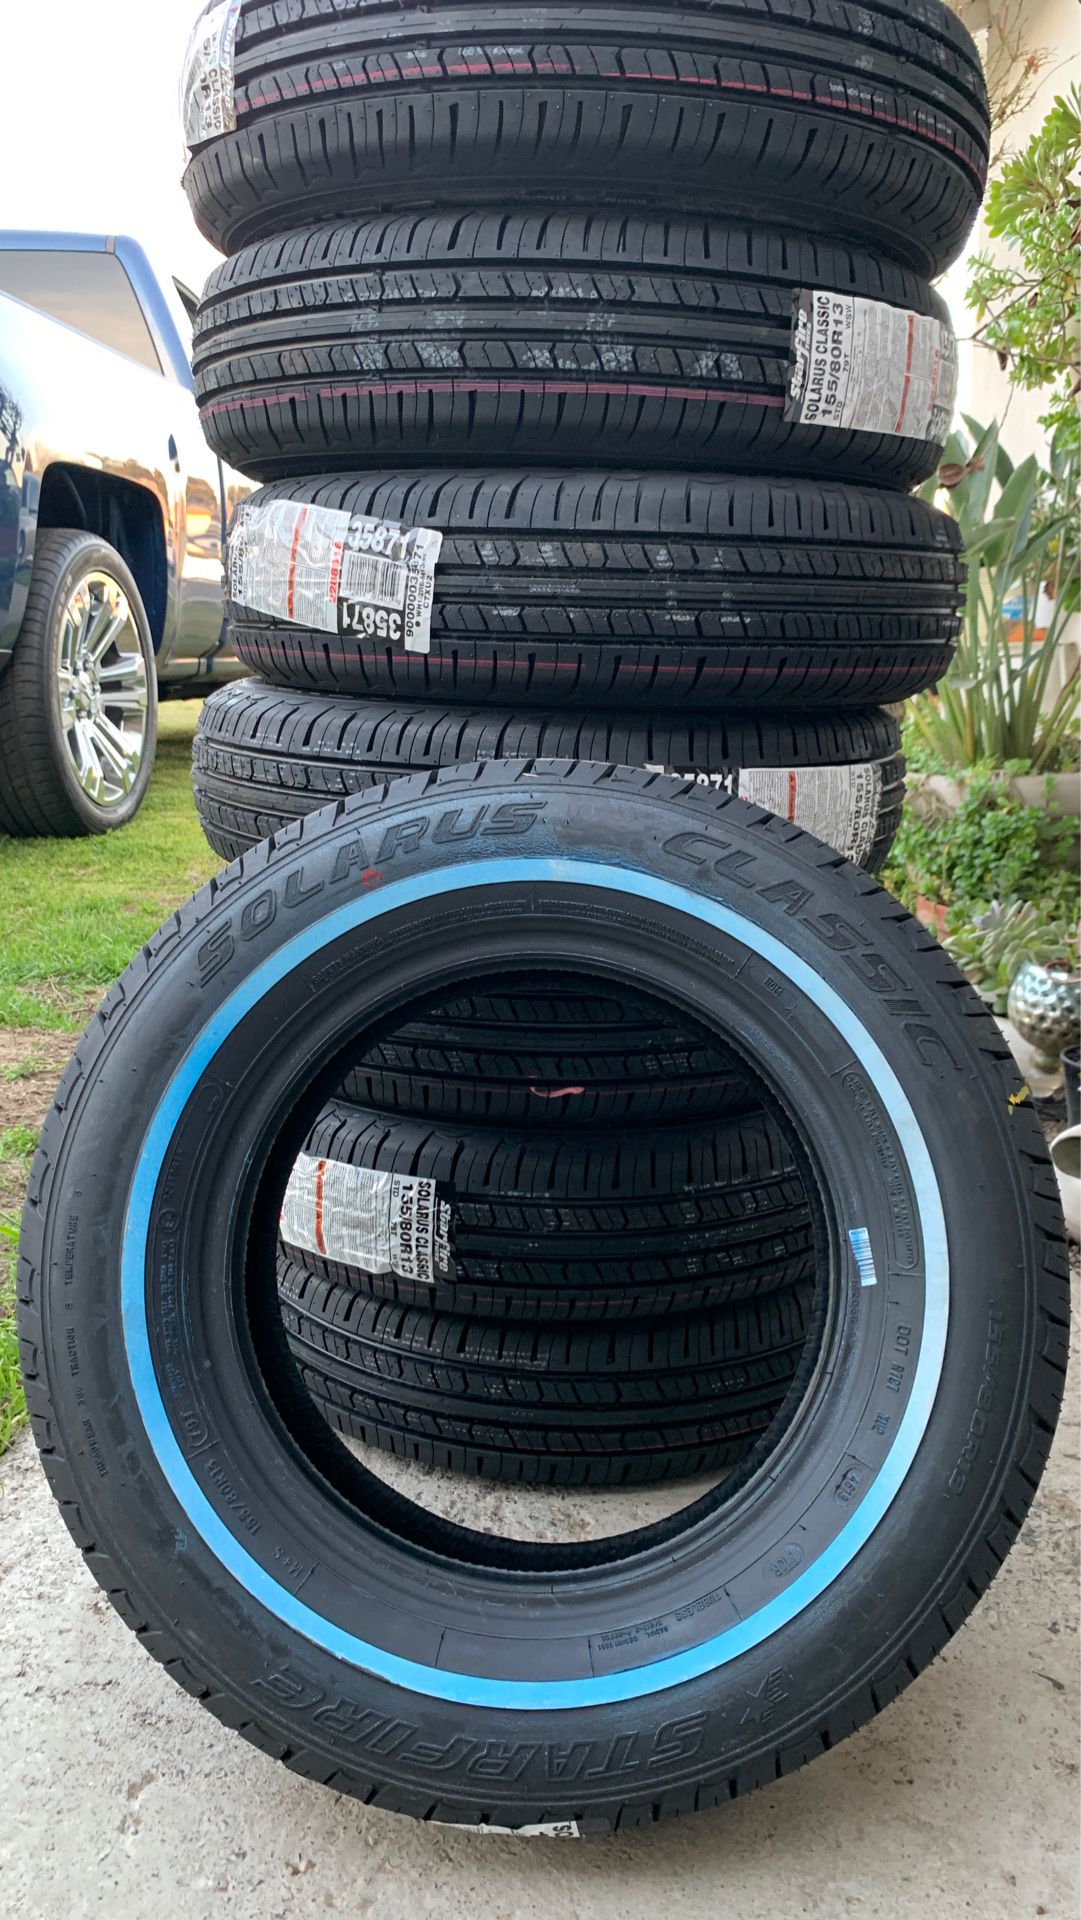 155/80R13 white wall tires